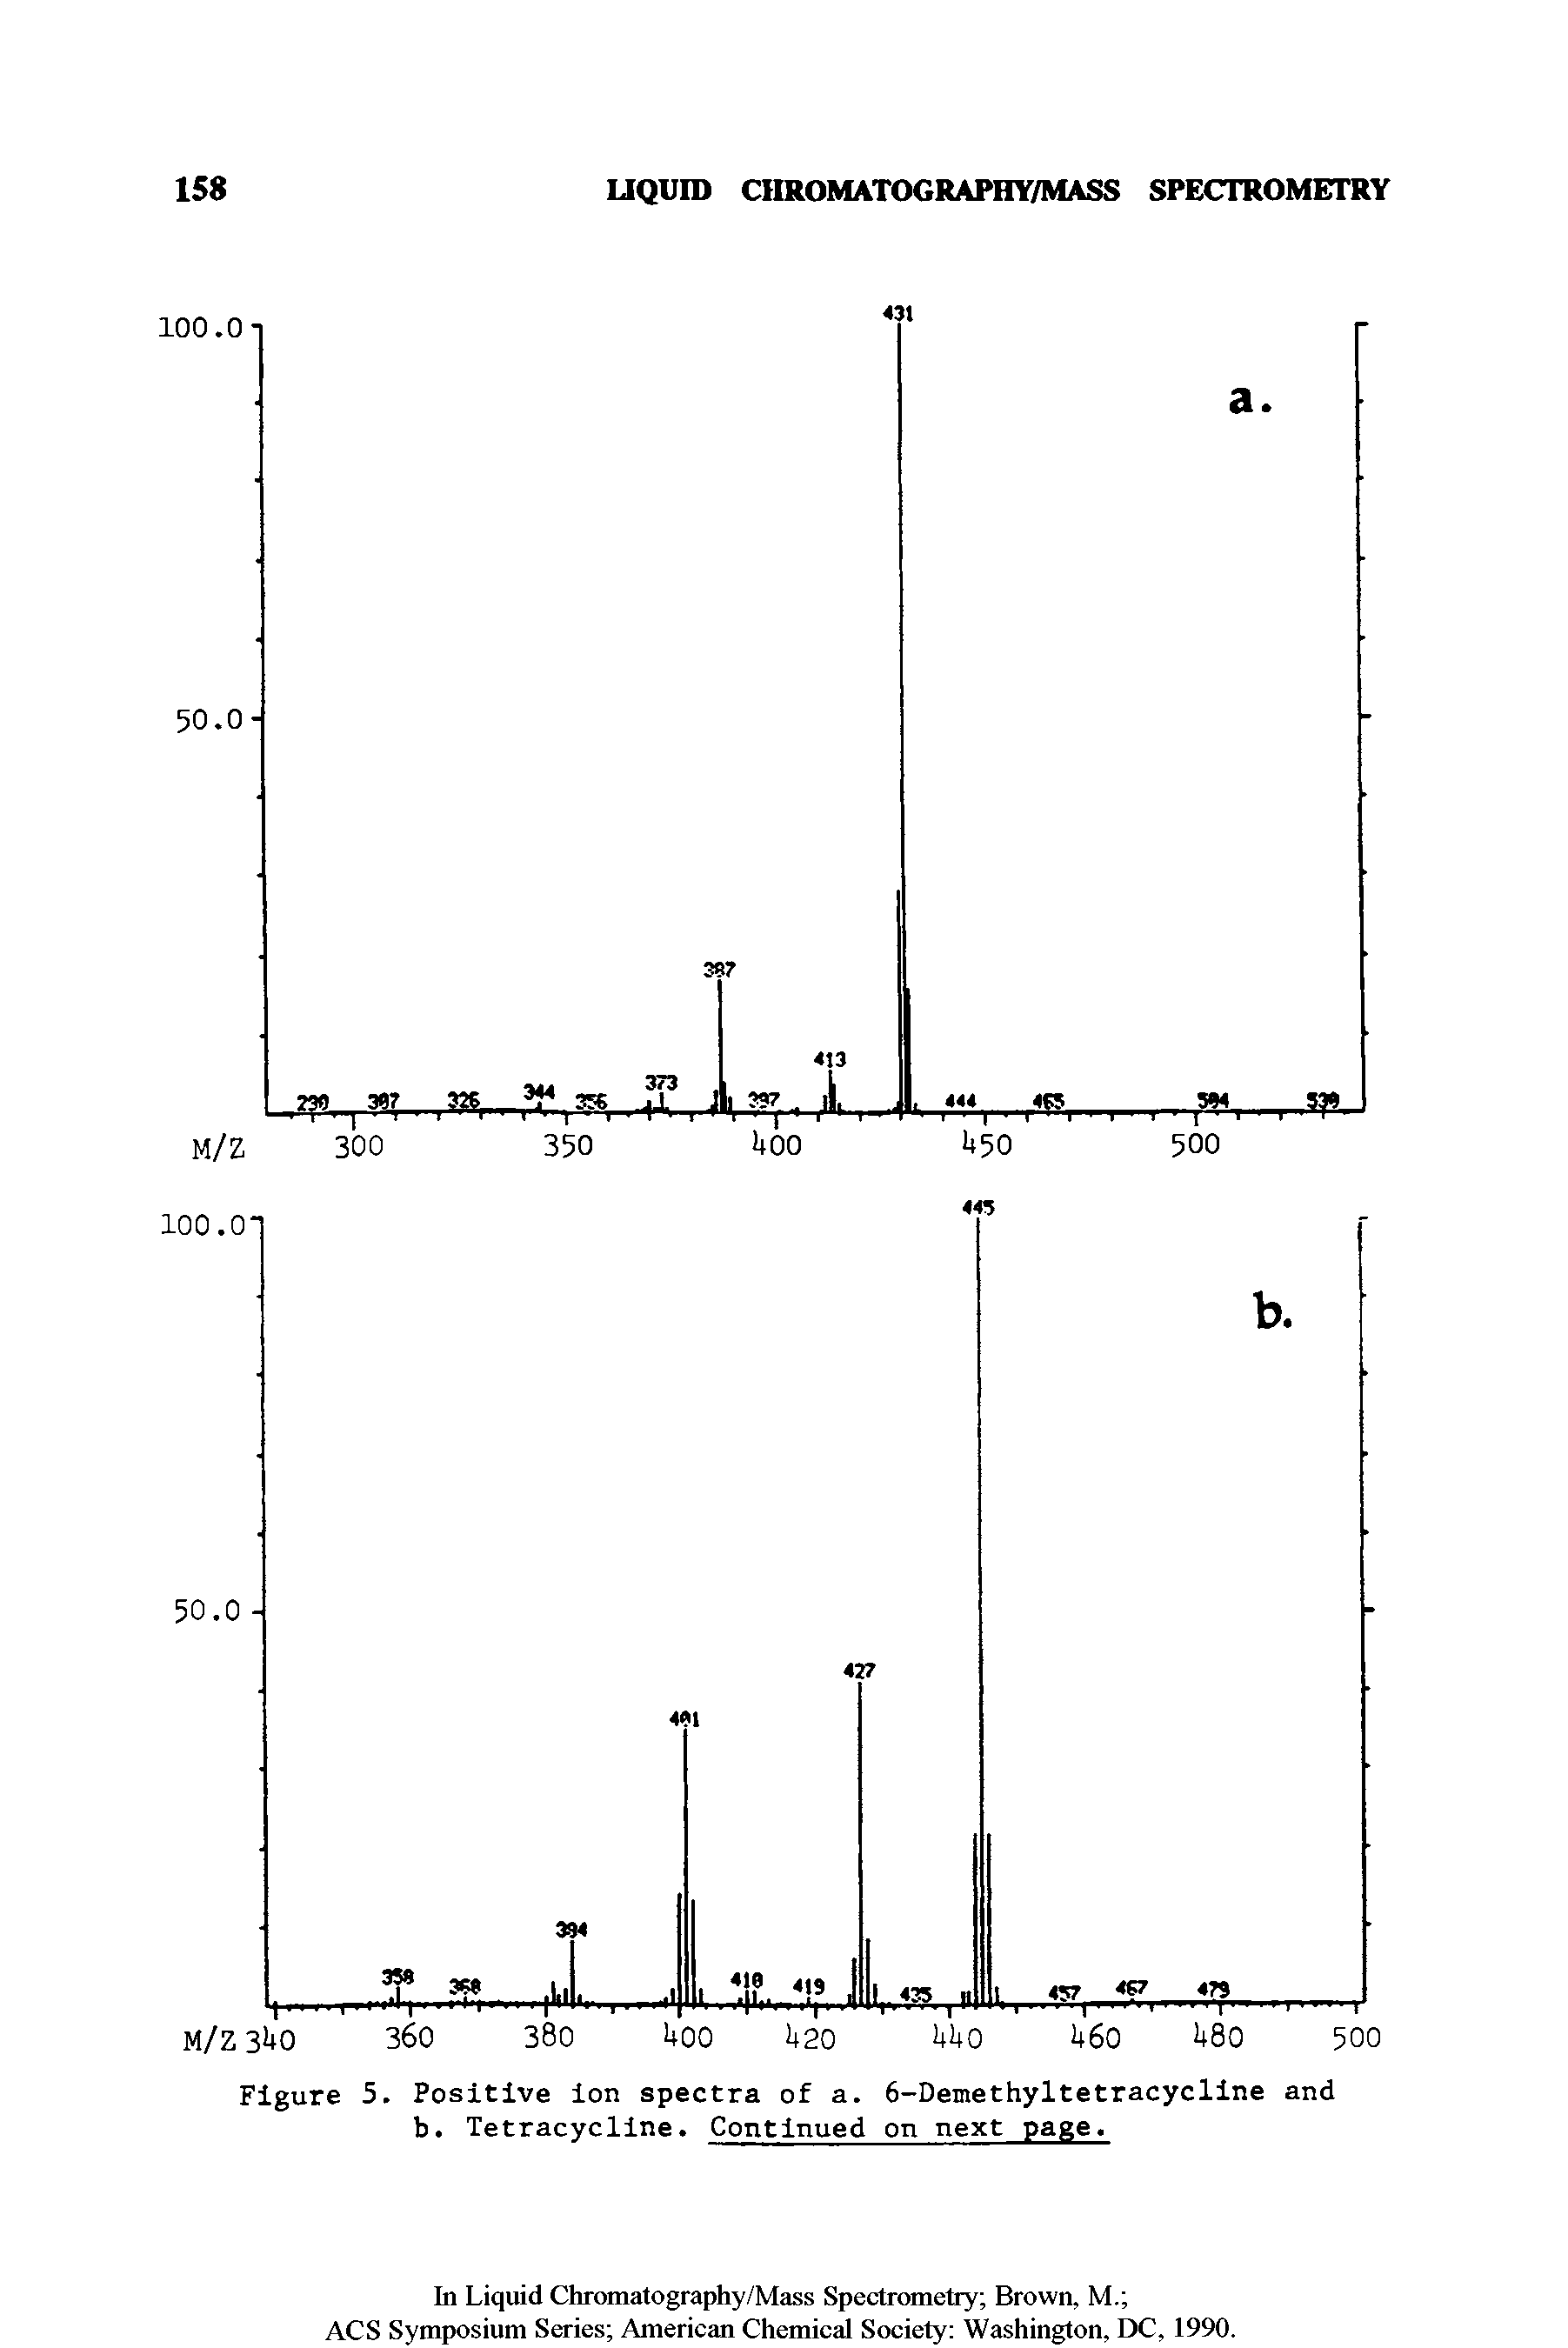 Figure 5. Positive ion spectra of a. 6-Demethyltetracycline and b. Tetracycline. Continued on next page.